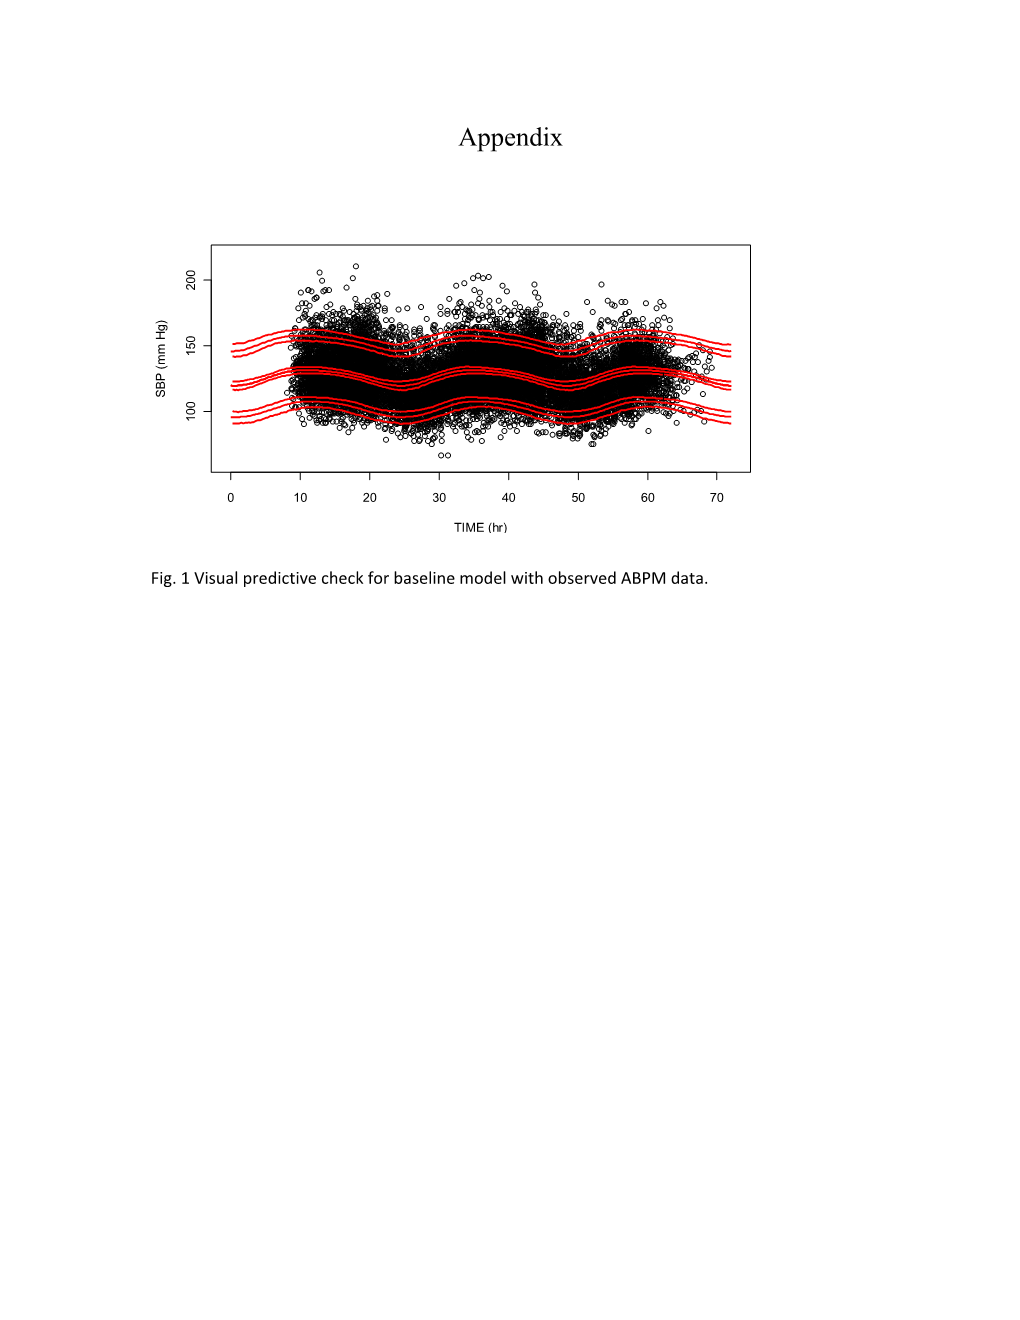 Fig. 1 Visual Predictive Check for Baseline Model with Observed ABPM Data